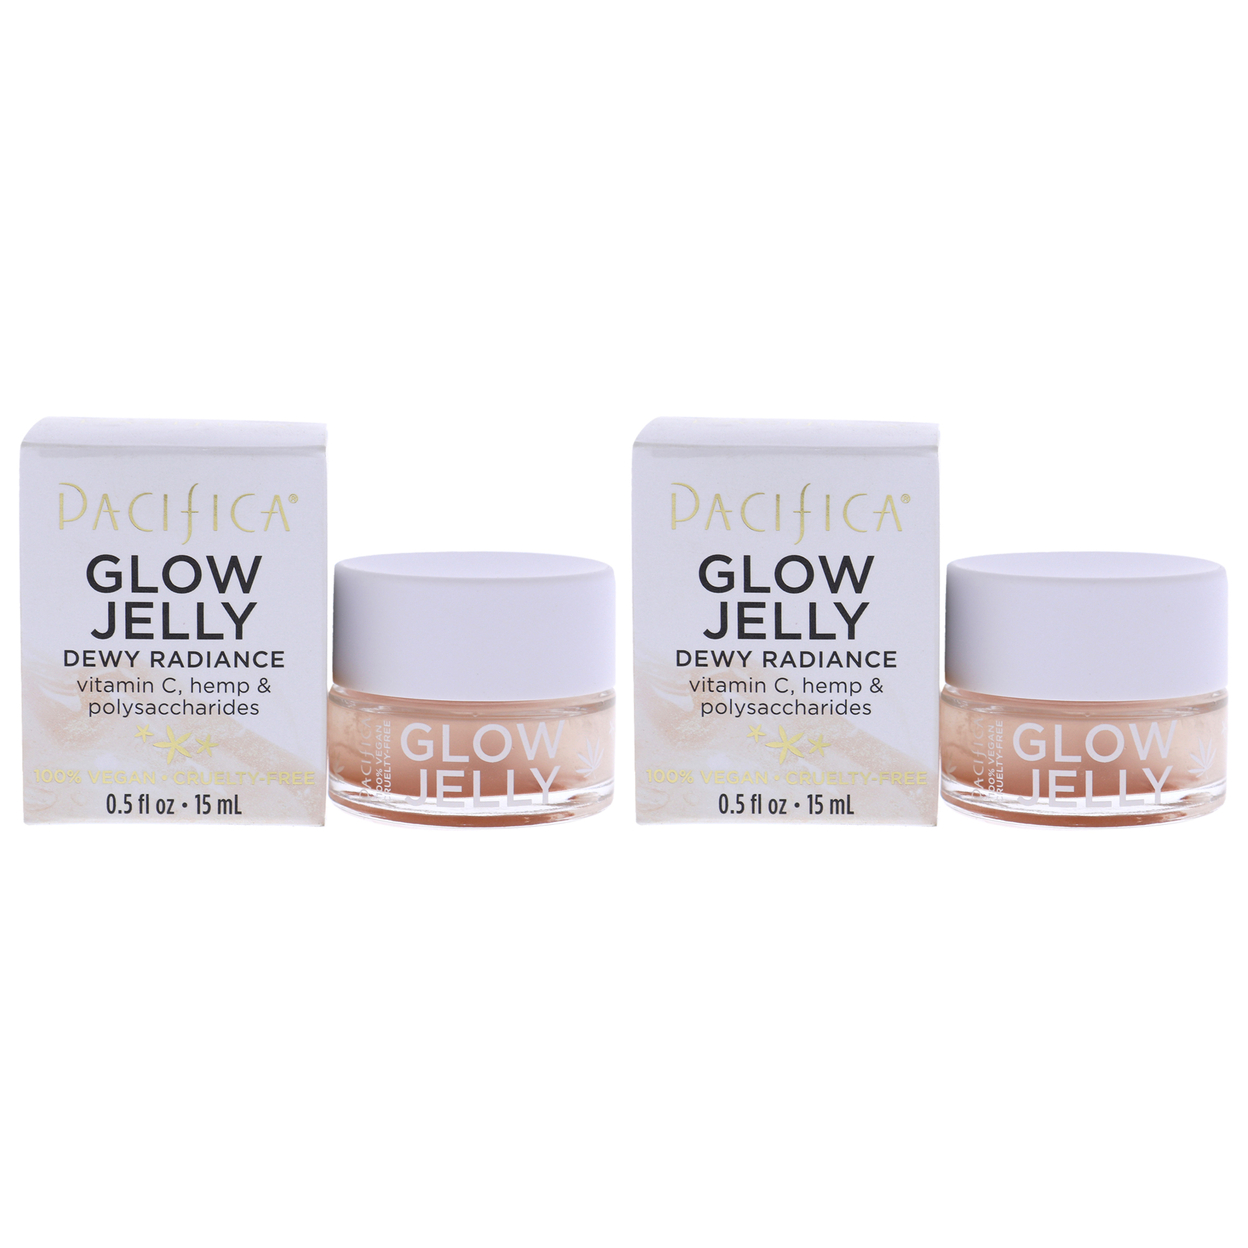 Pacifica Glow Jelly Dewy Radiance - Pack Of 2 Gel 0.5 Oz